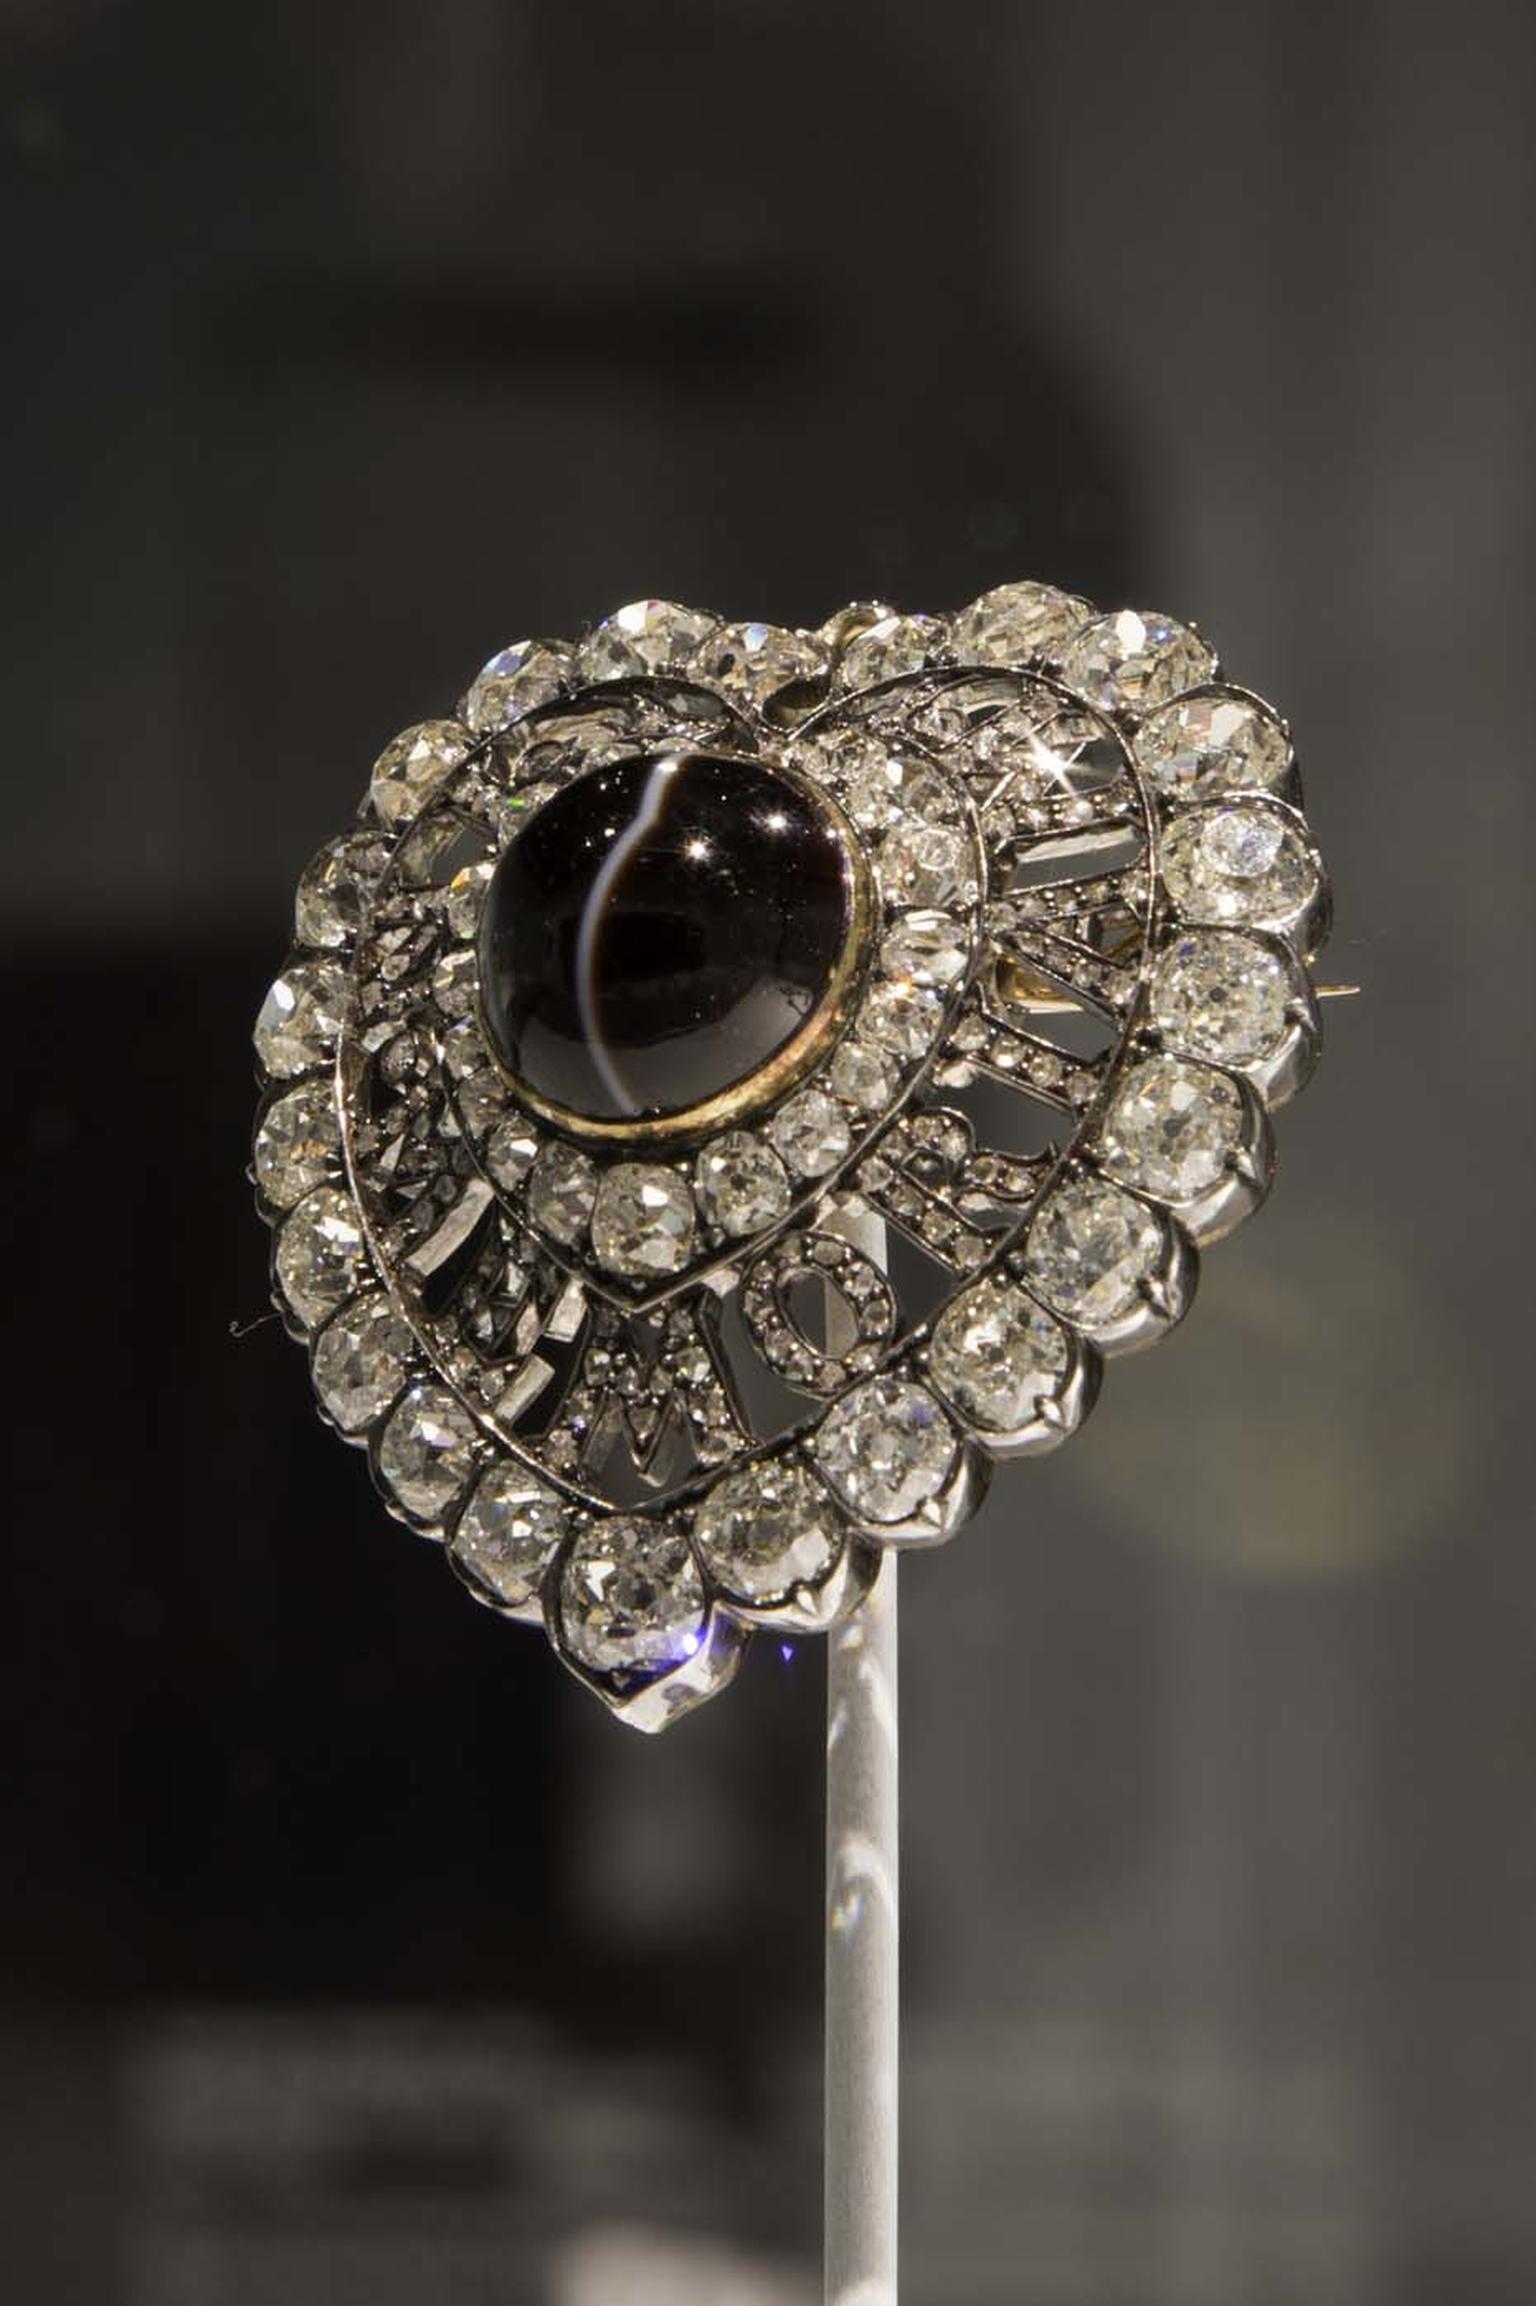 The prestigious Rothschild collection has lent some outstanding examples of Victorian Mourning jewelry, including a heart-shaped diamond brooch with the words “In Memoriam” spelt out in a display of virtuoso craftsmanship.